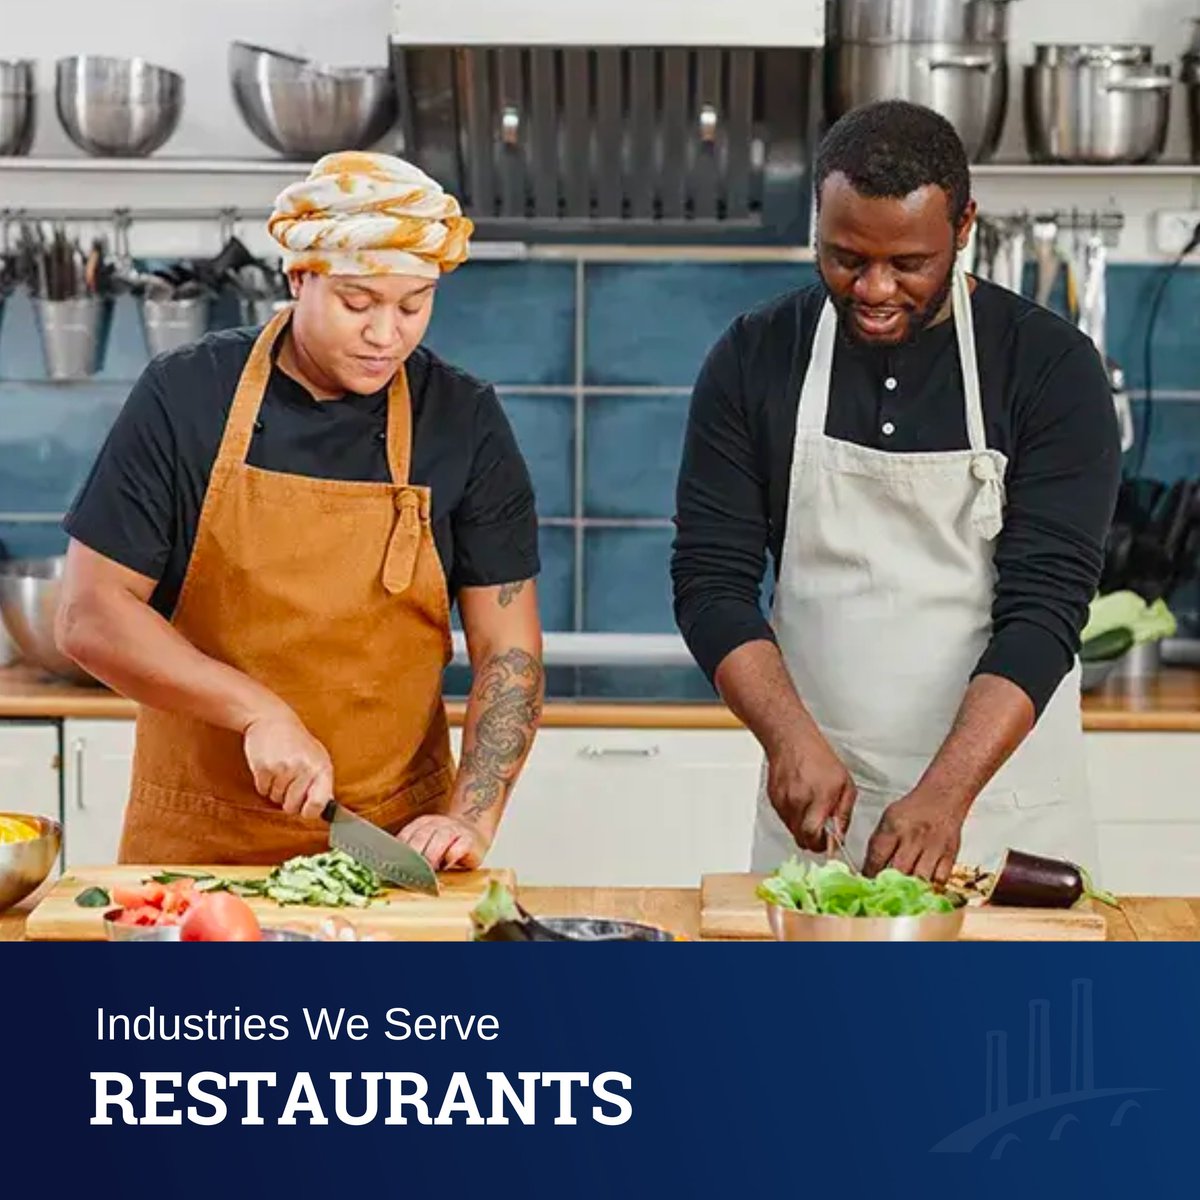 A restaurant owner faces a unique set of accounting challenges. Let us handle the financial components of your restaurant business so you can focus on what you do best - operating a restaurant. bit.ly/3F4F6ub 

#RestaurantOwner #business #accounting #SMB #CPA